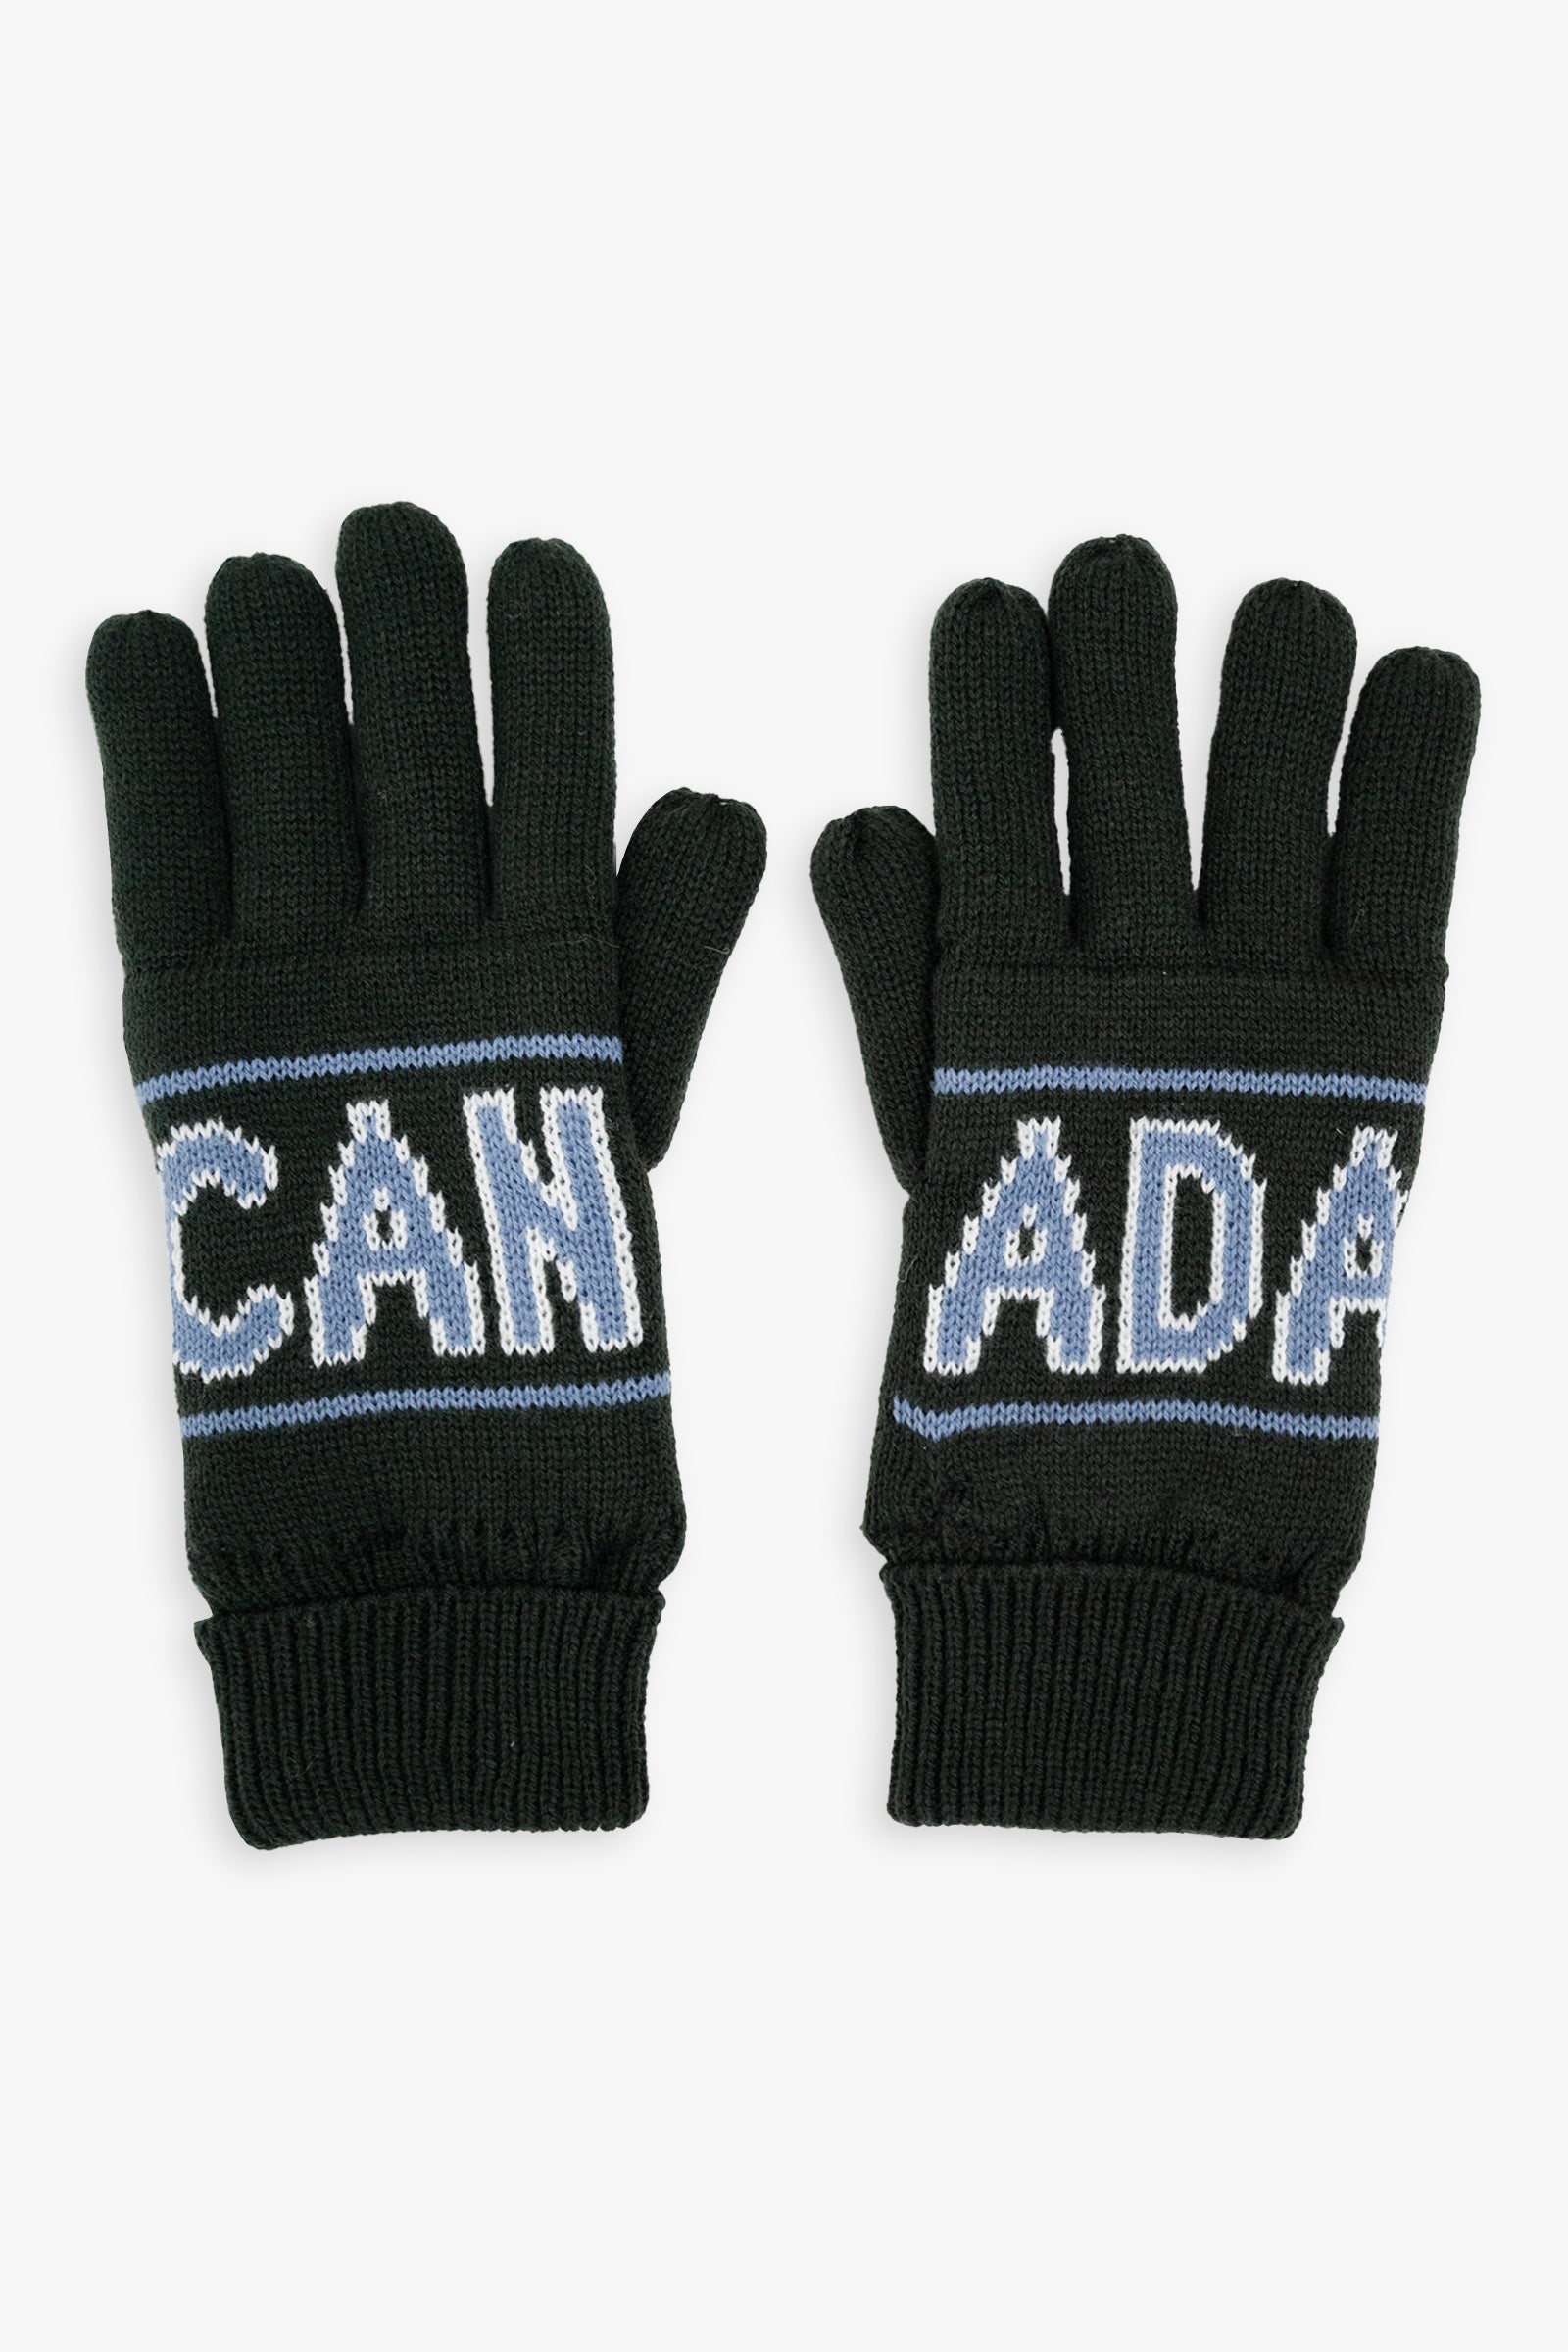 Canada Men's Lined Gloves